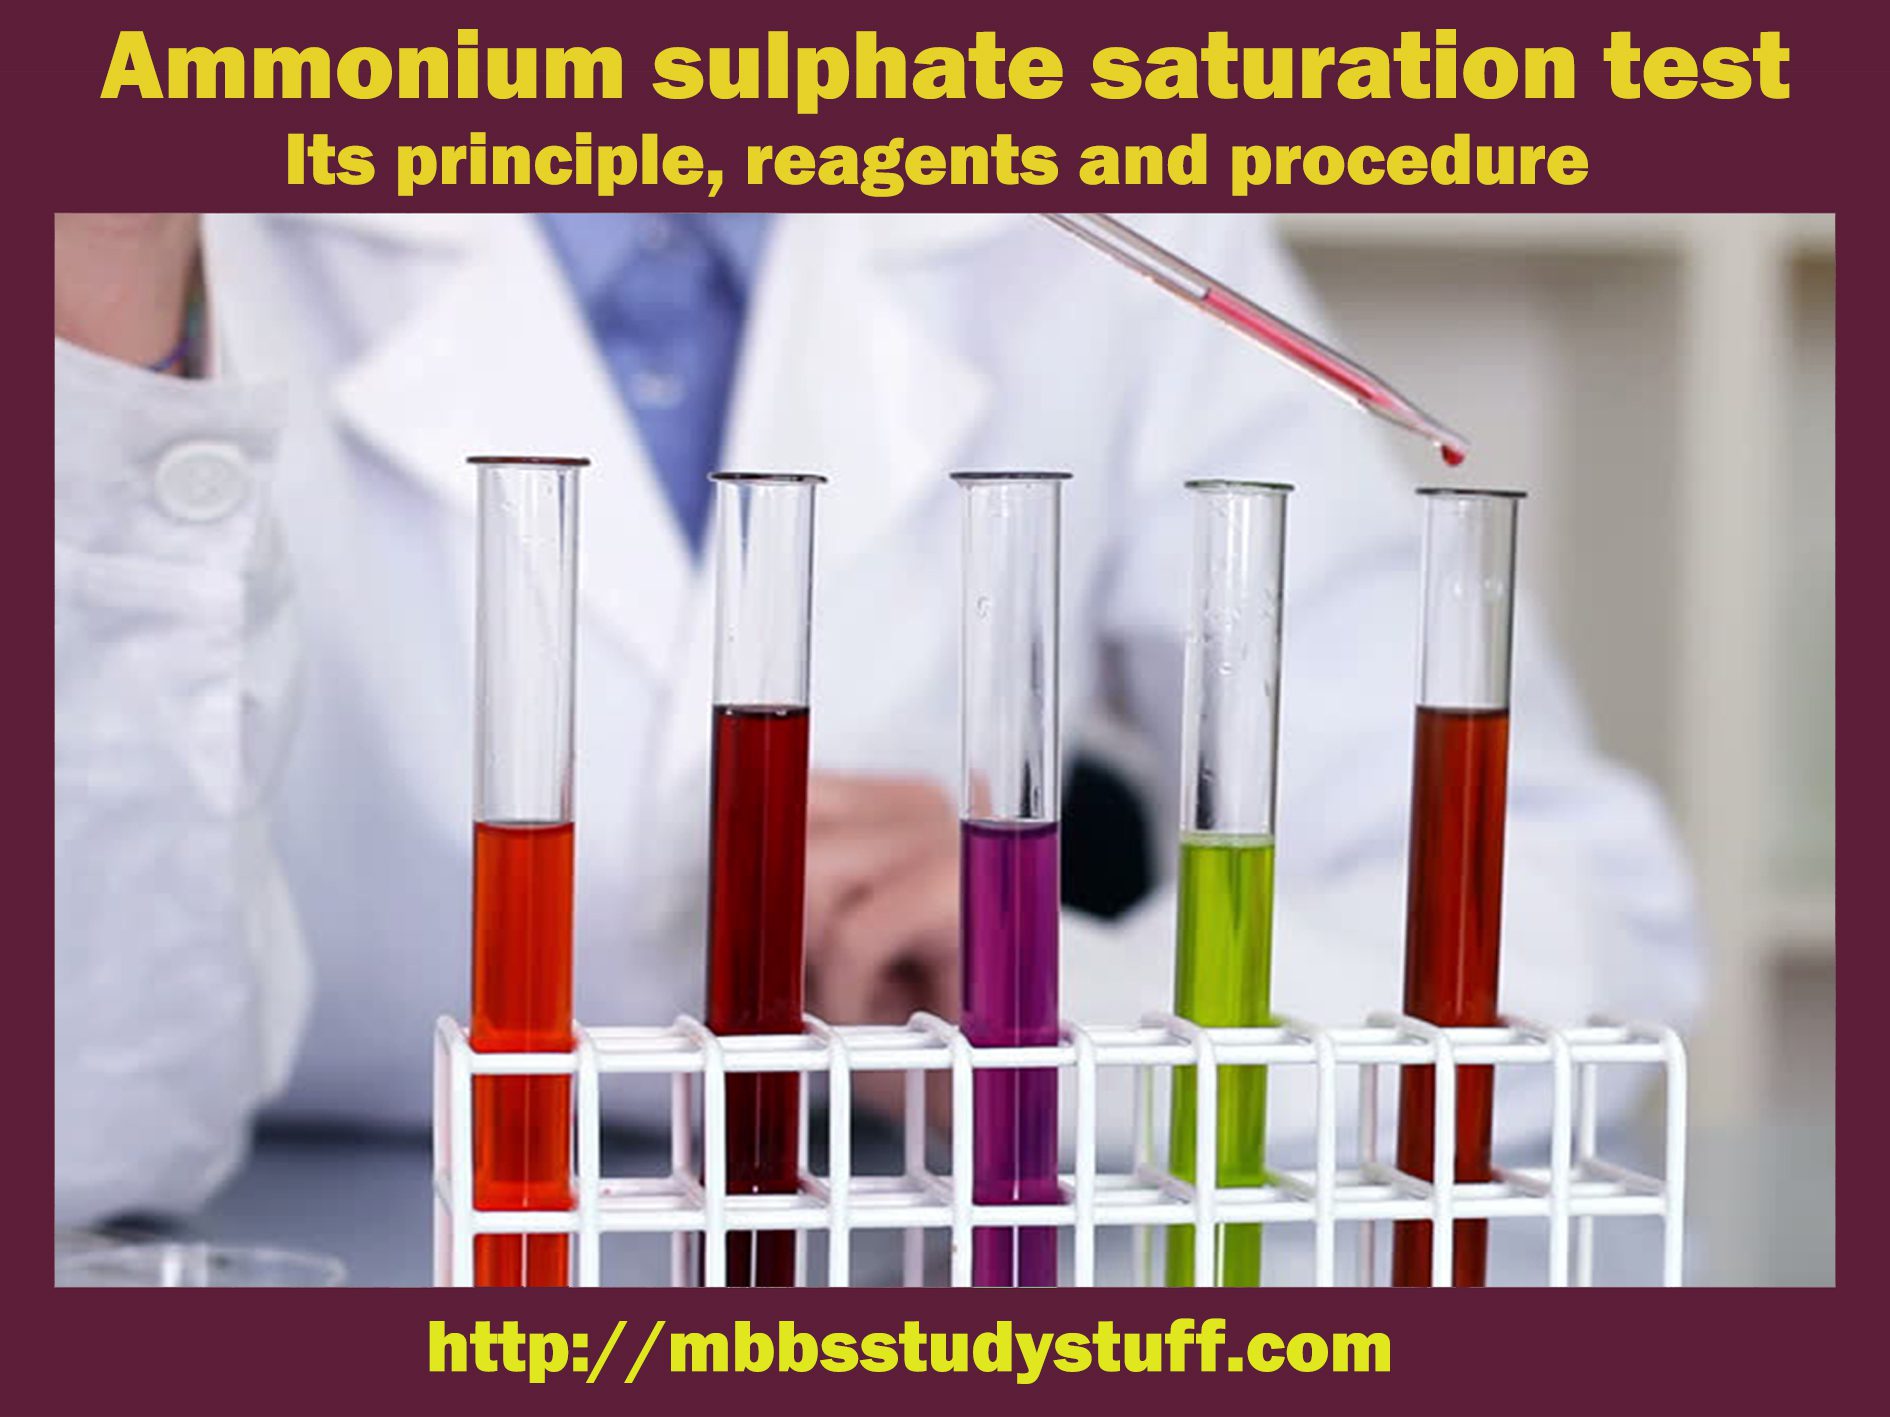 Ammonium sulphate saturation test - Its principle, reagents and procedure